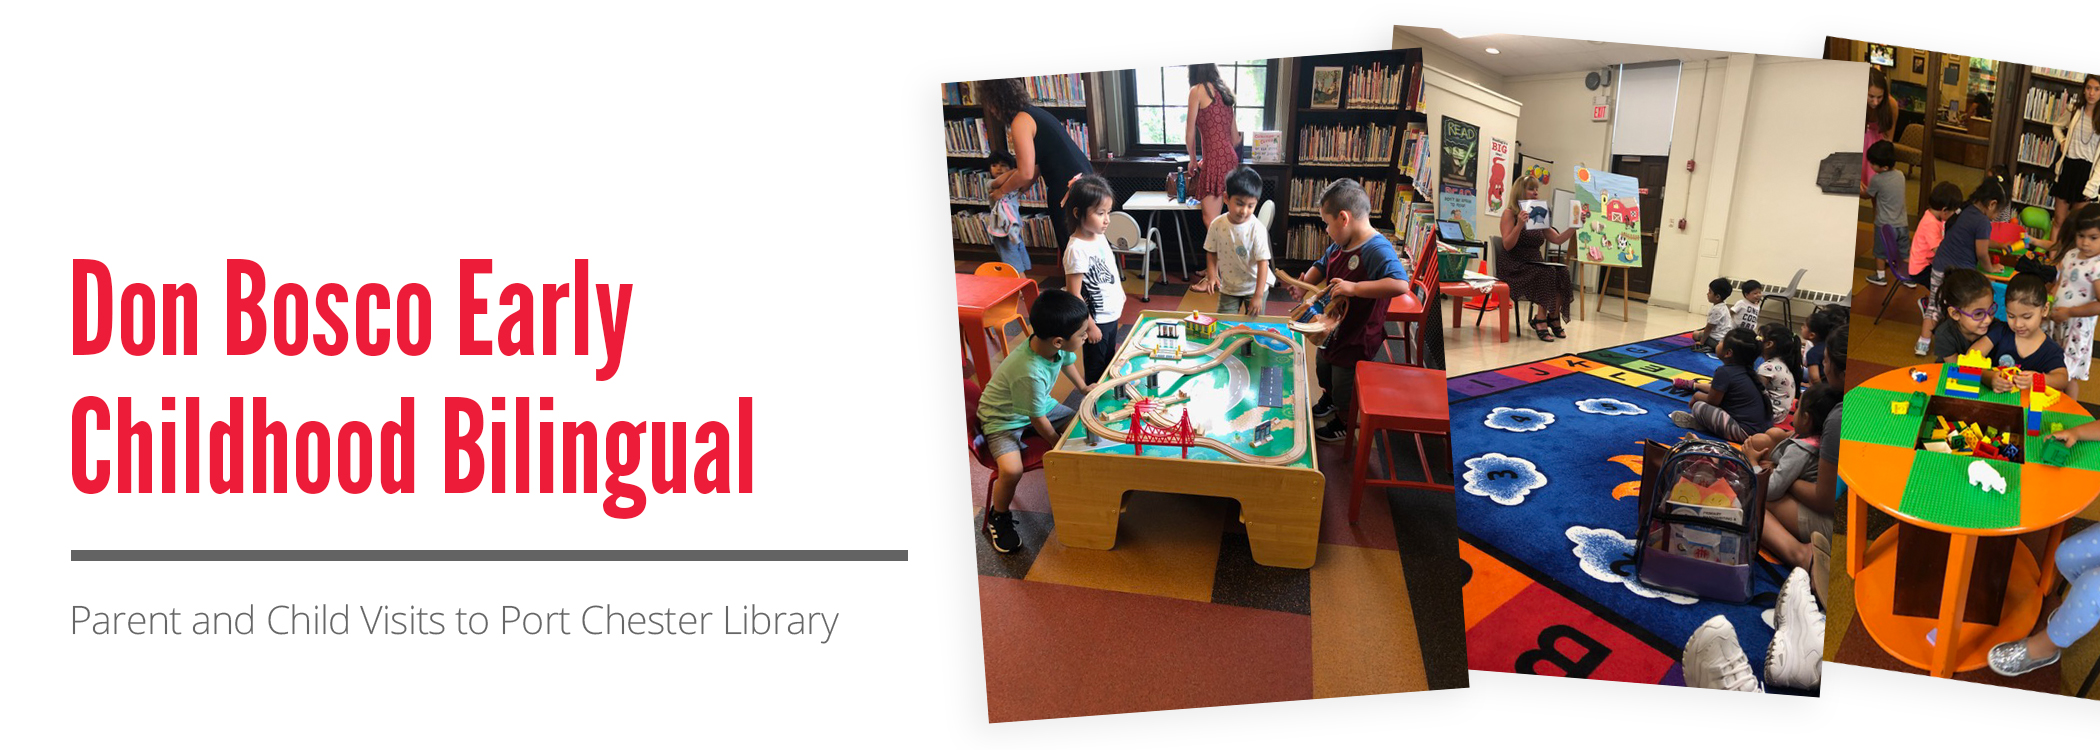 Don Bosco Early Childhood Bilingual - Parent and Child Visits to Port Chester Library